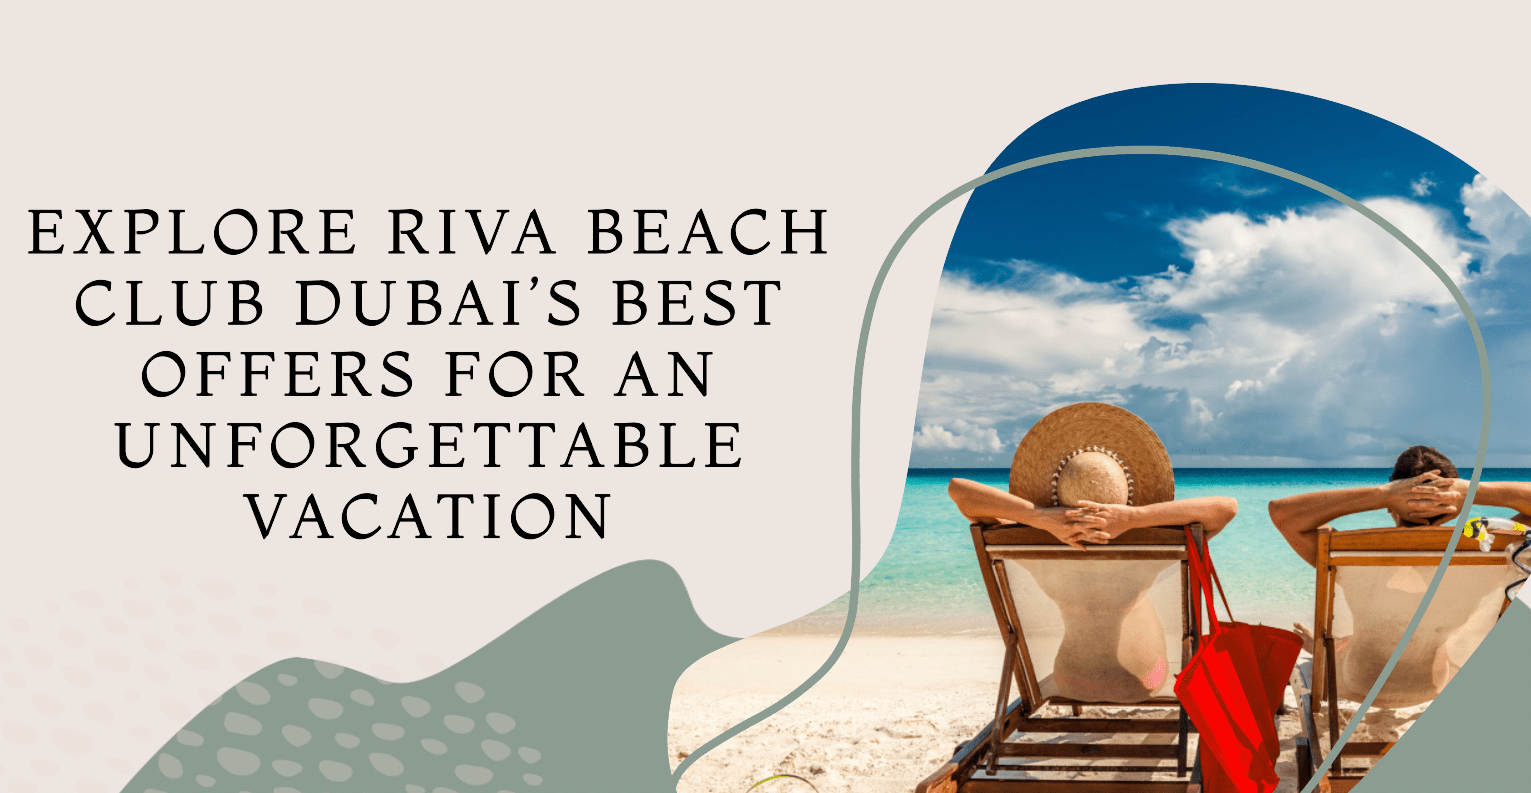 Unforgettable Vacations at Riva Beach Club Dubai: Best Offers Await!